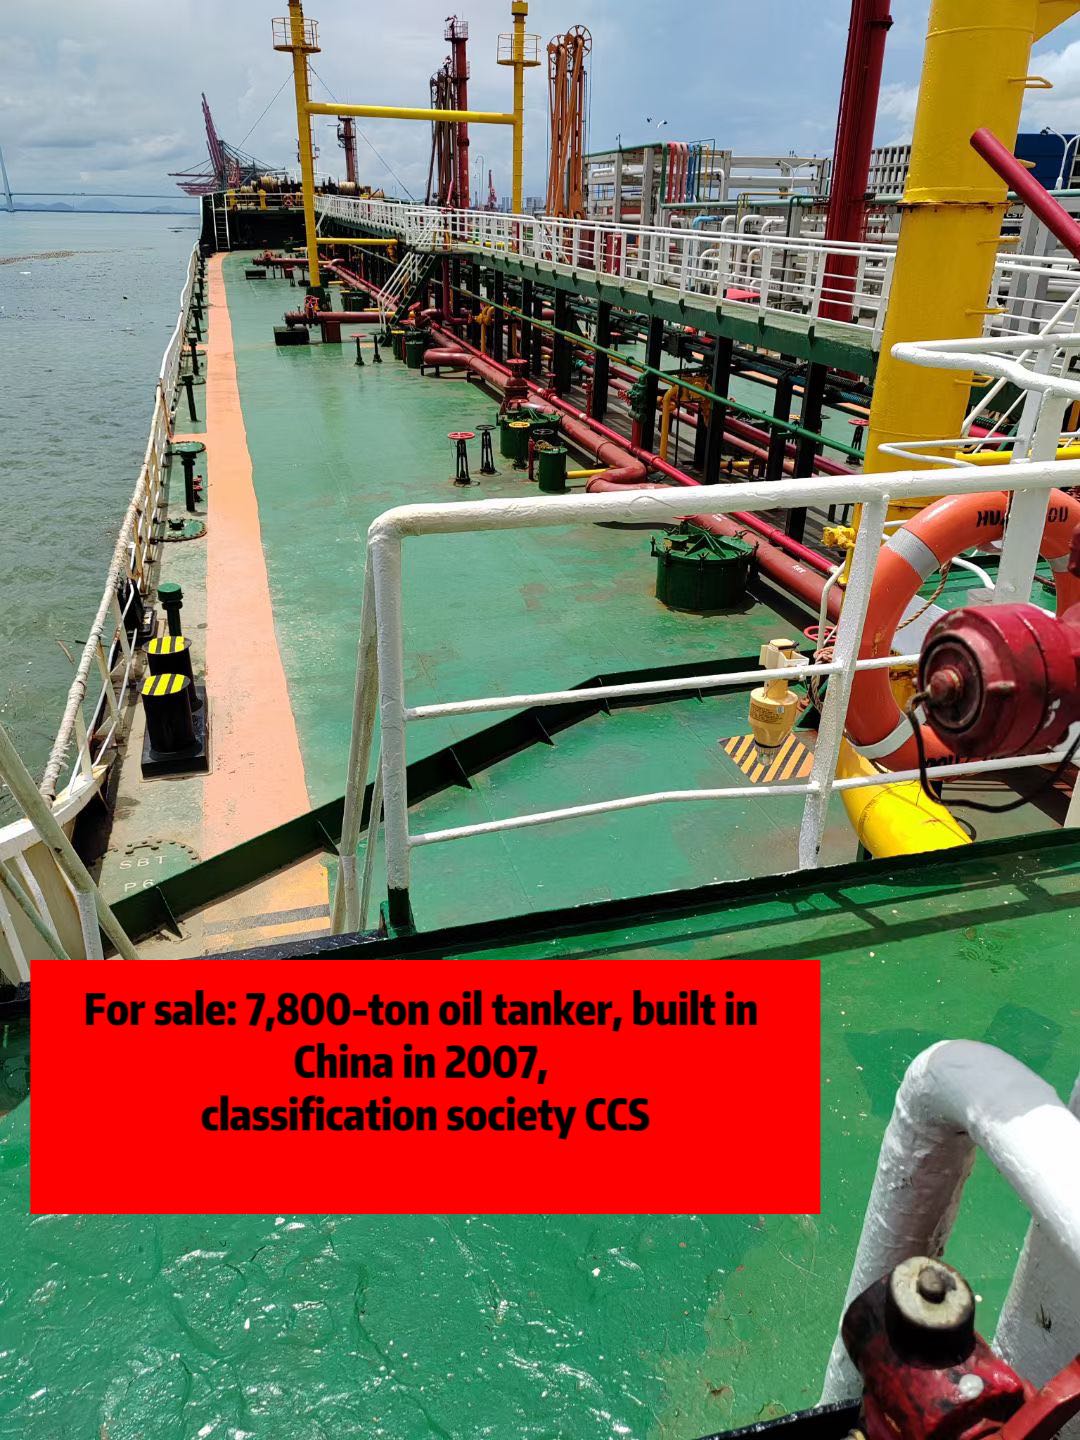 For sale: 7,800-ton oil tanker, built in China in 2007, classification society CCS